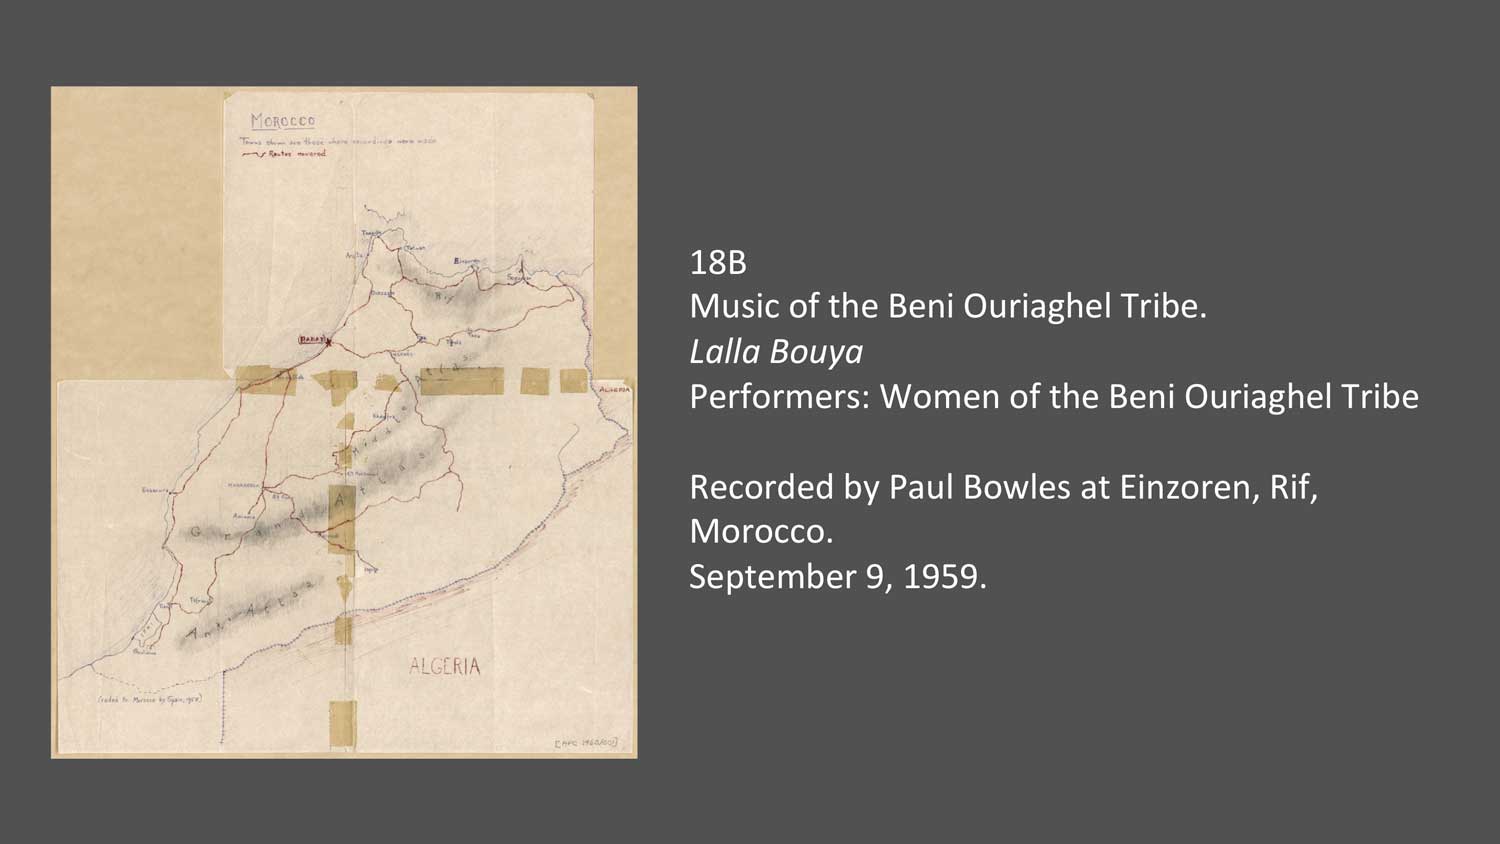 18B
Music of the Beni Ouriaghel Tribe.
Lalla Bouya
Performers: Women of the Beni Ouriaghel Tribe

Recorded by Paul Bowles at Einzoren, Rif, Morocco.
September 9, 1959.
